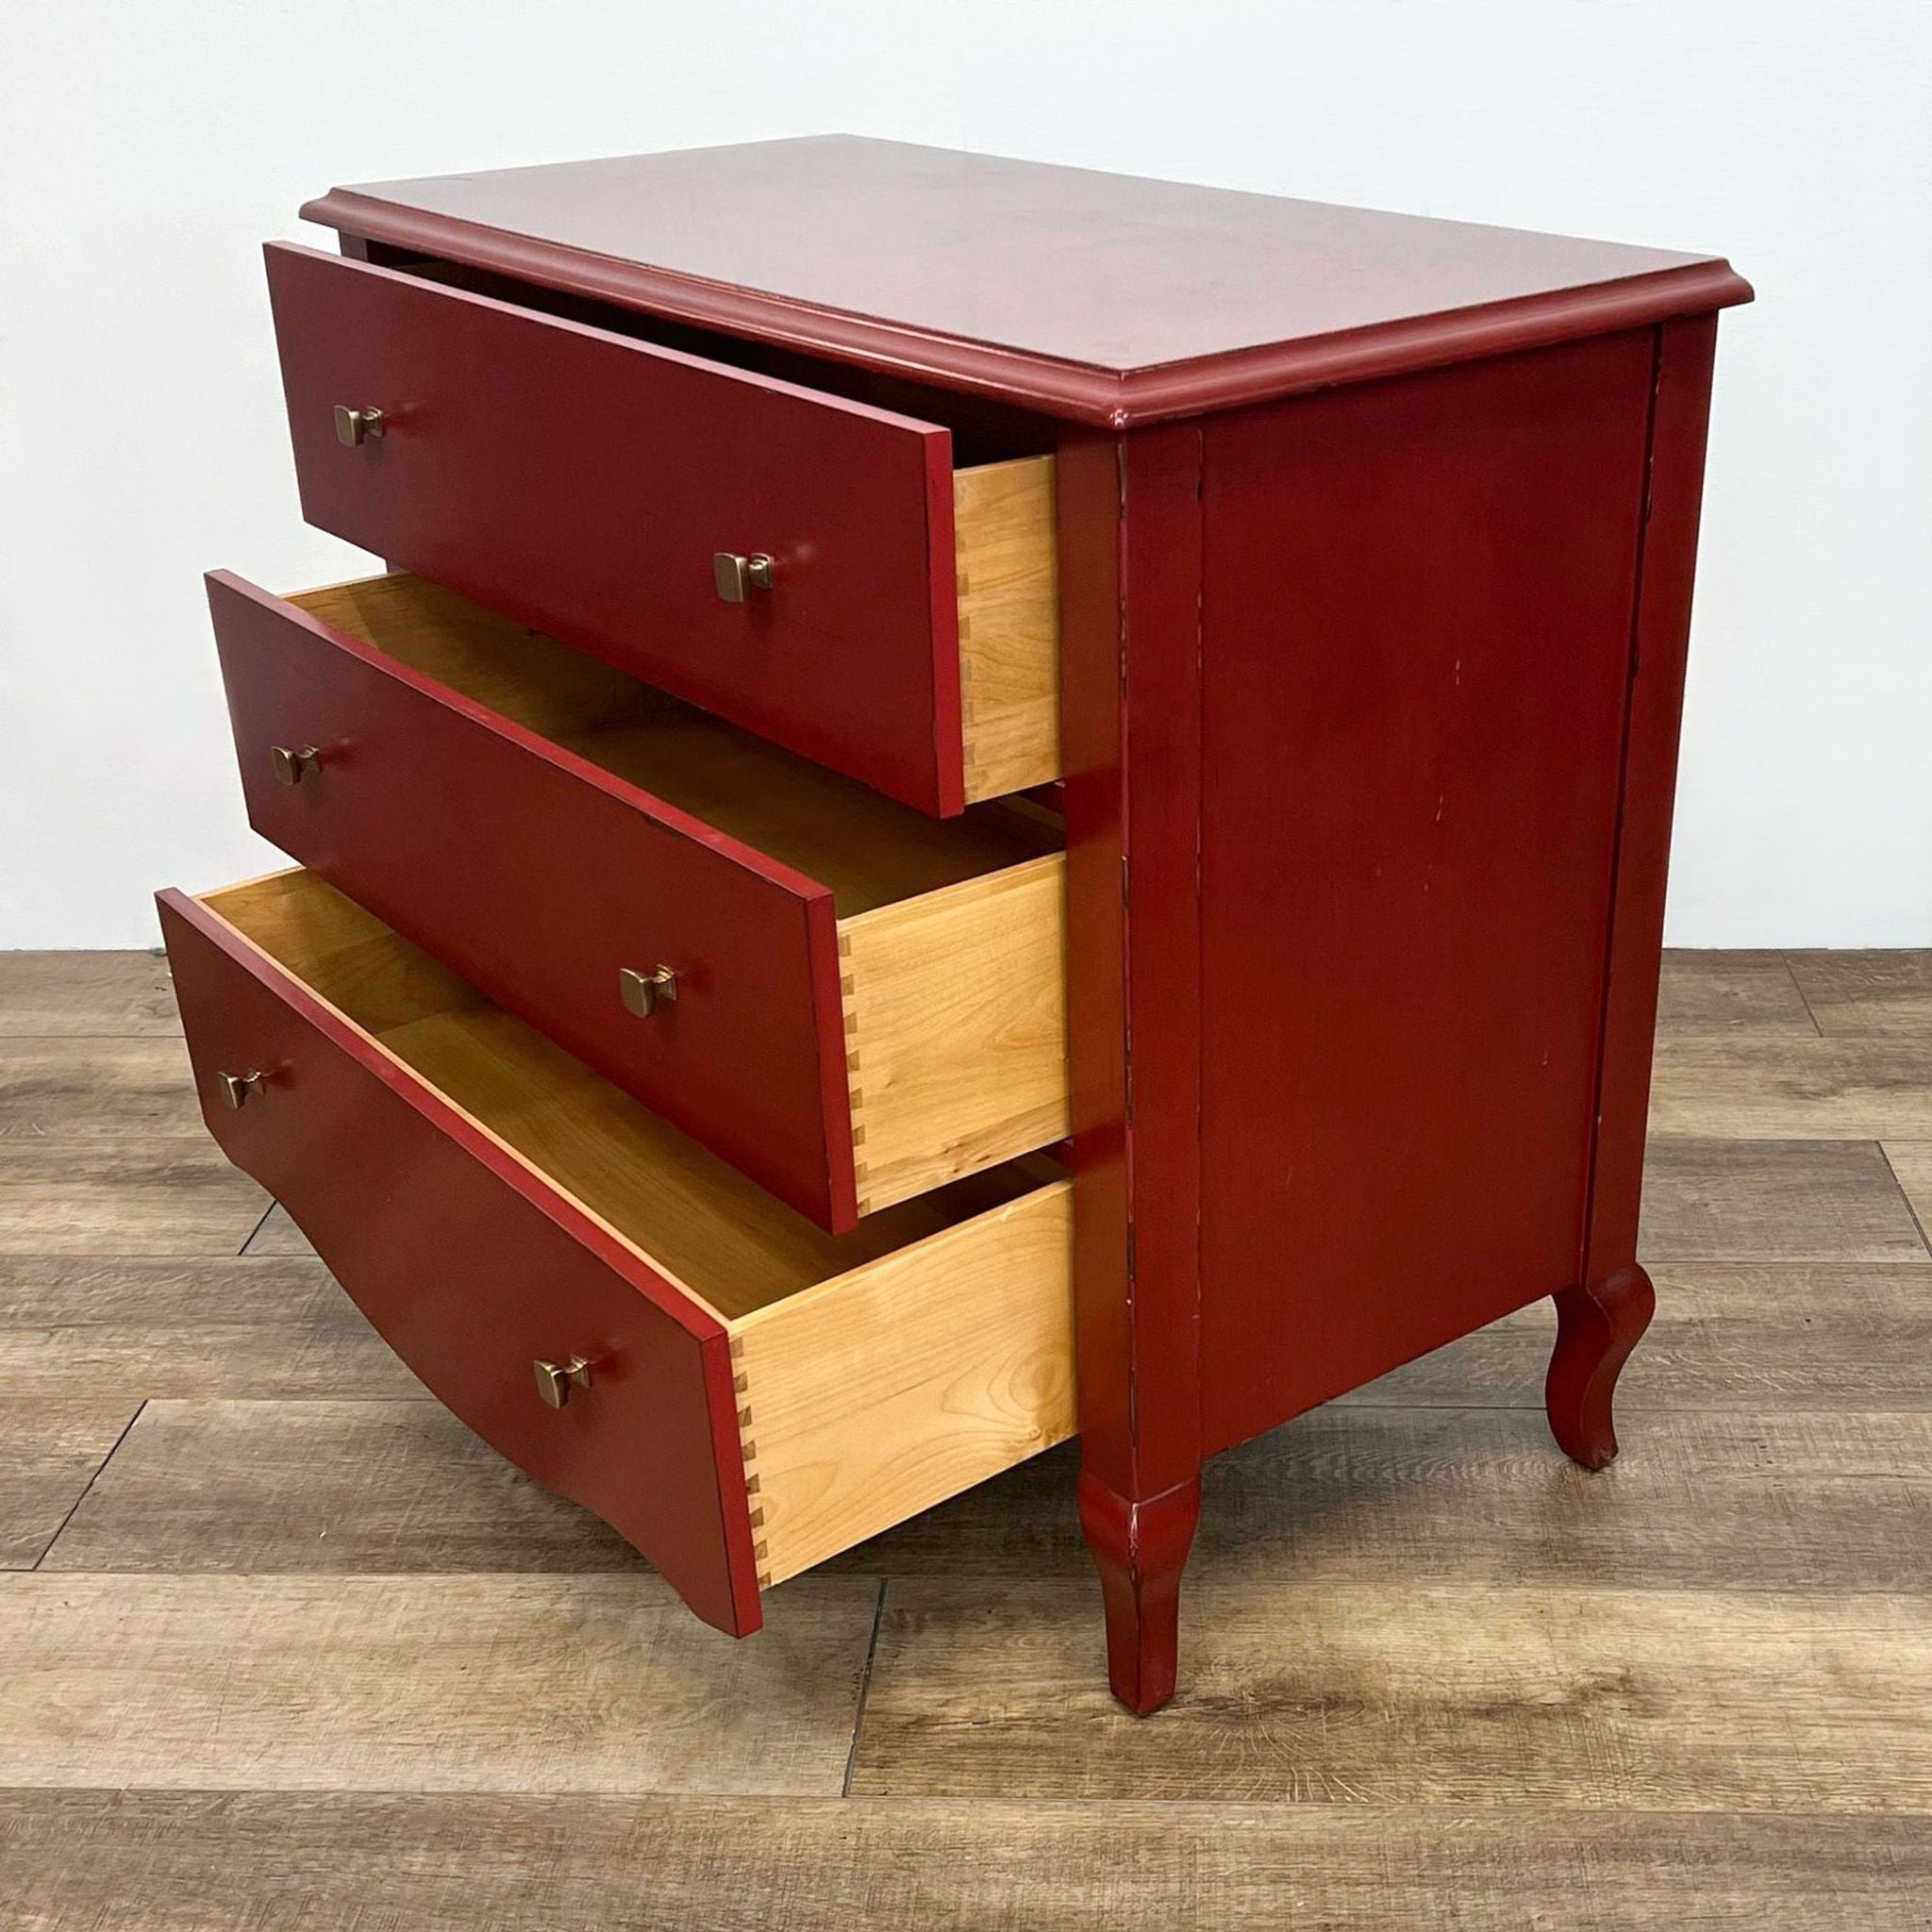 Pottery Barn red Luca 3-drawer dresser with open drawers revealing the inside, on a wooden floor.